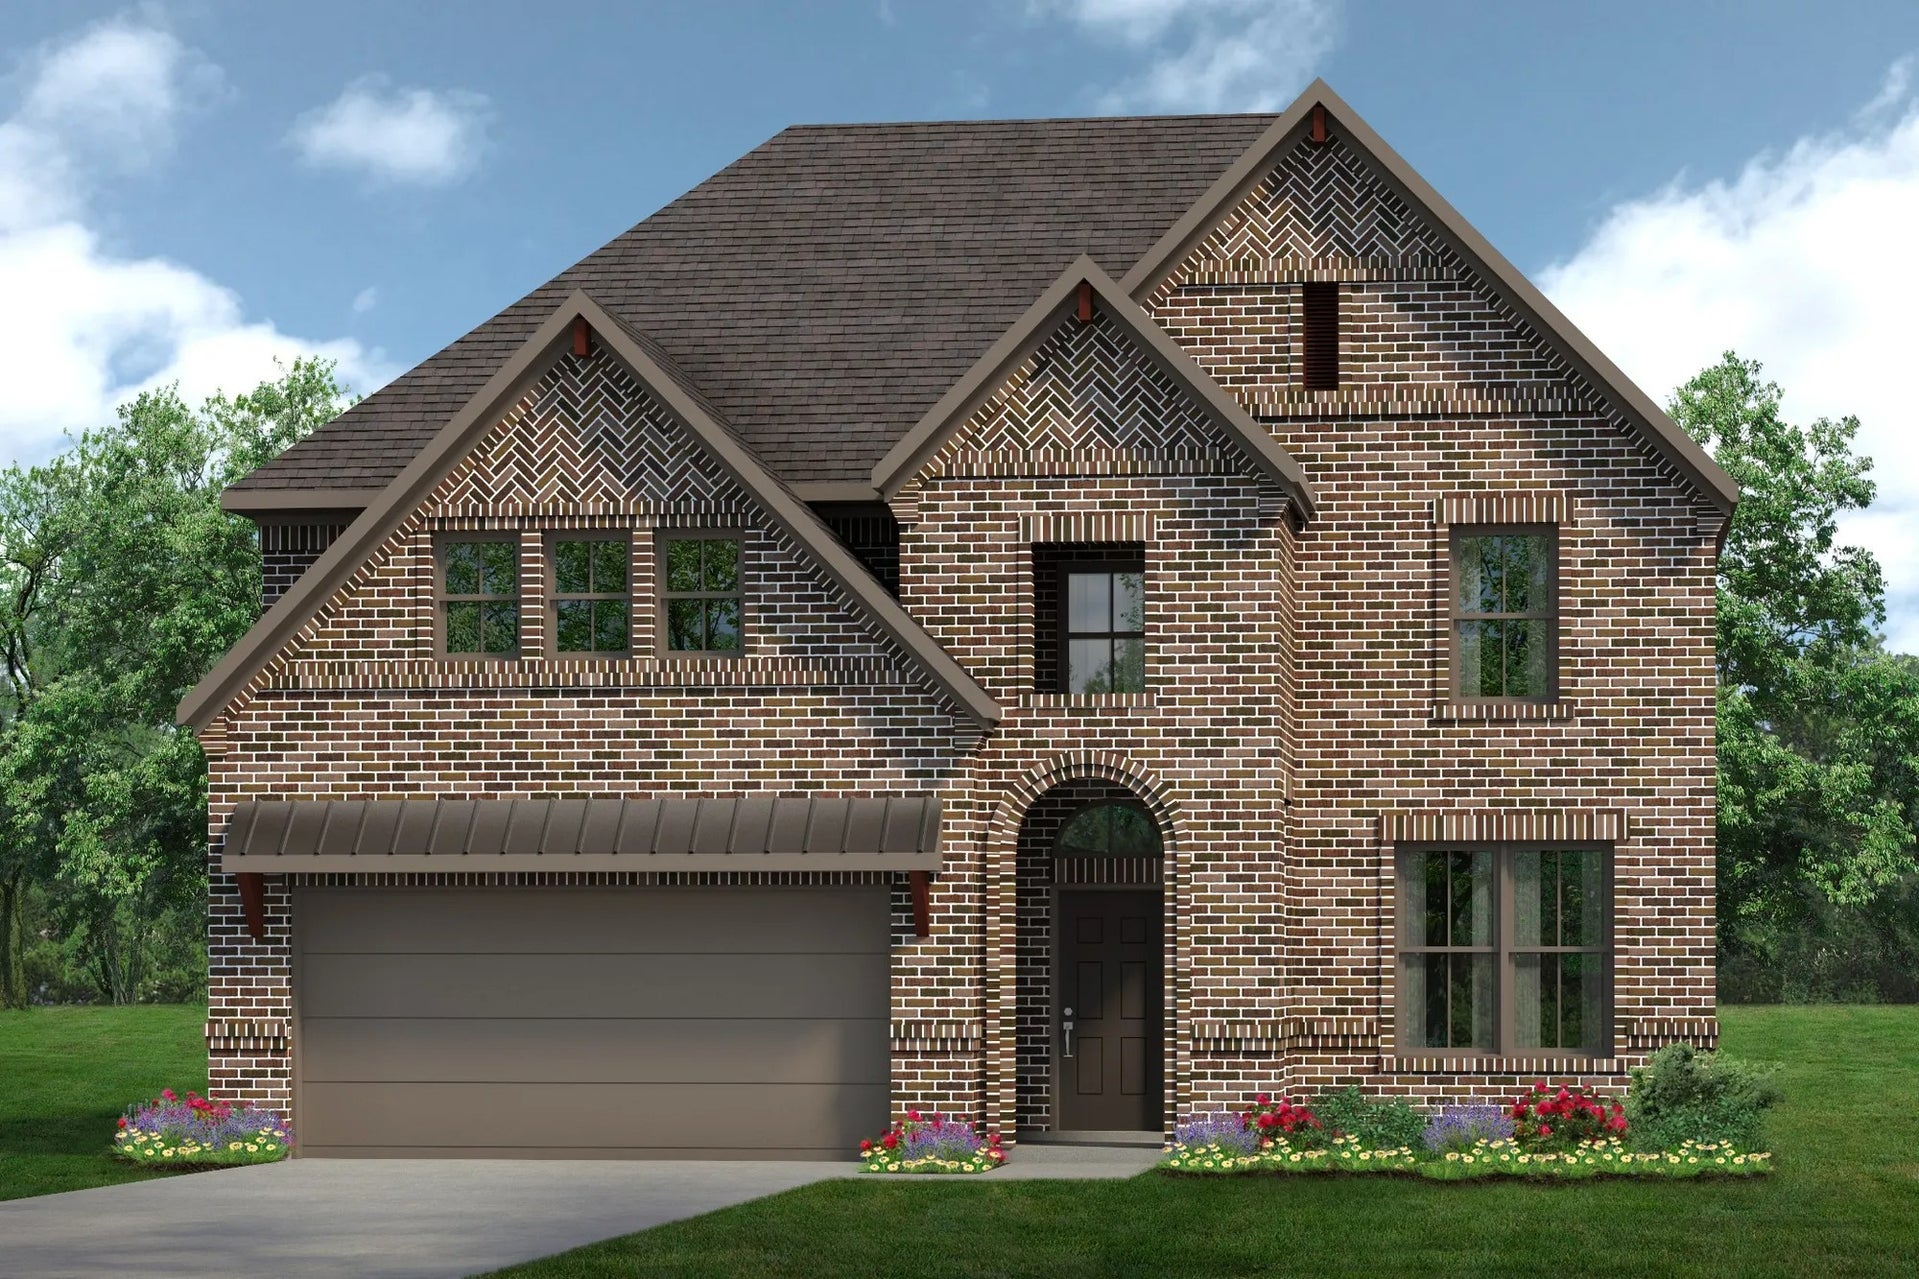 2844 C. 4br New Home in Crowley, TX